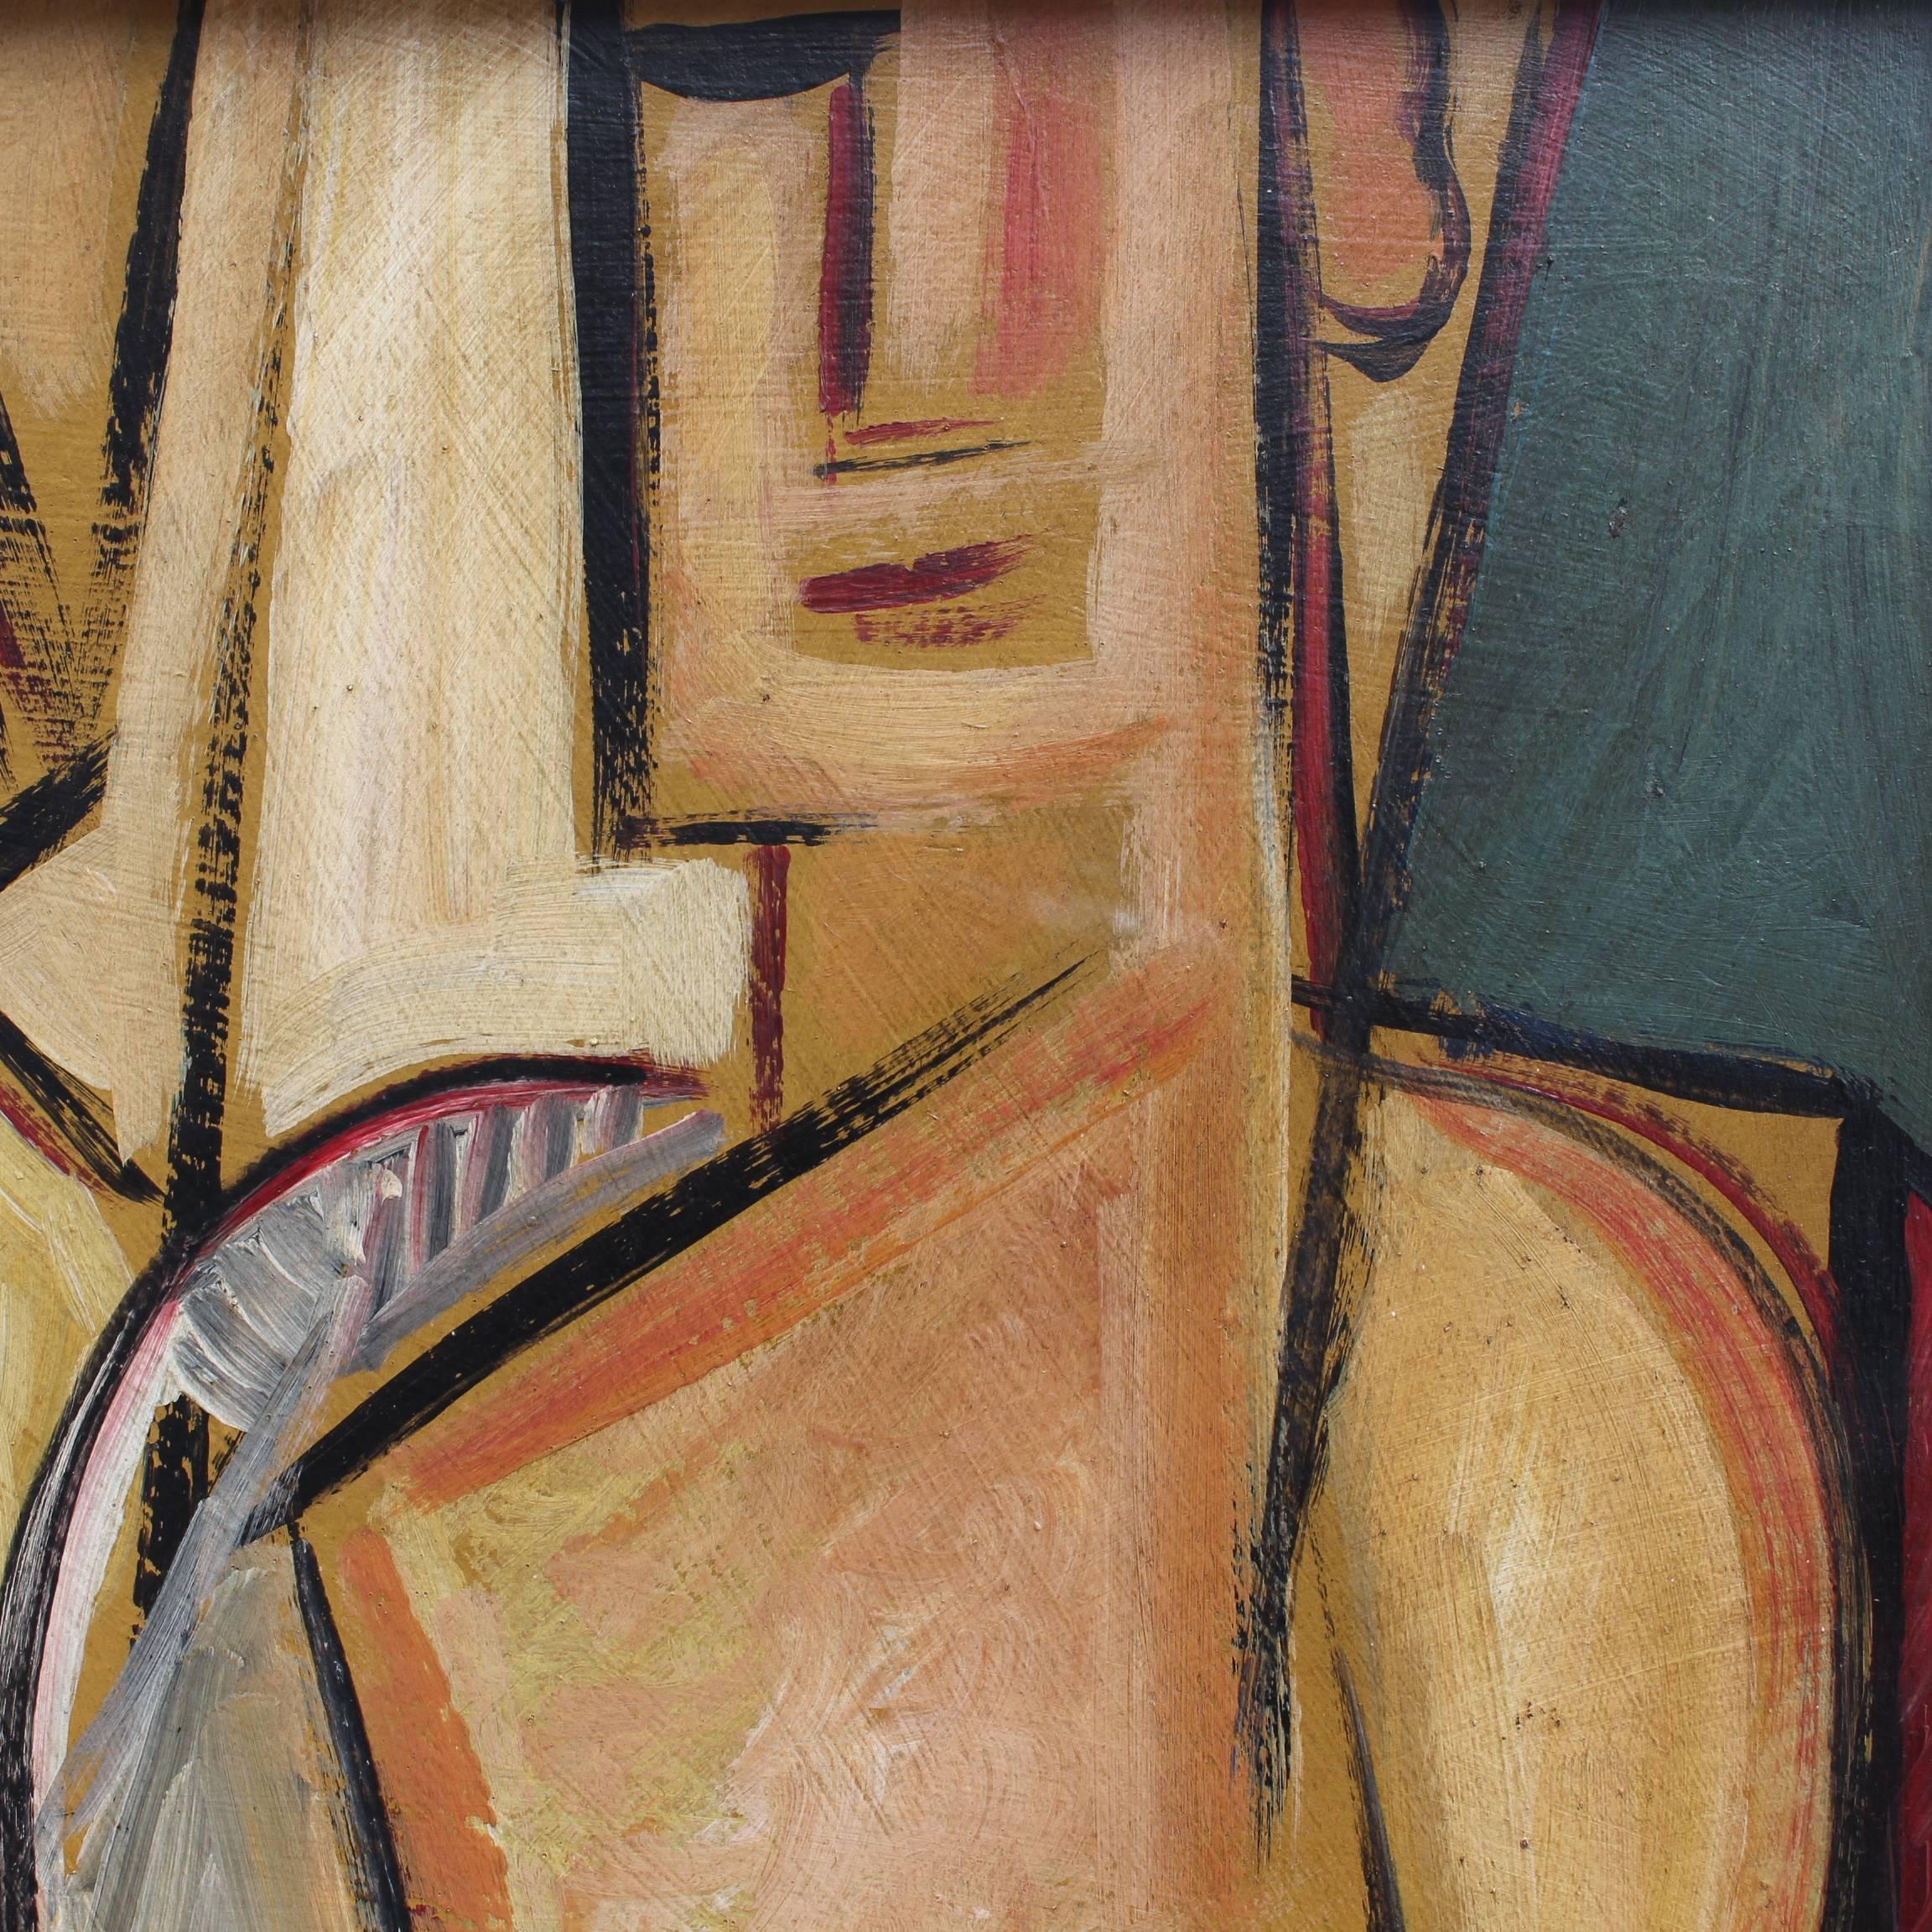 'Portrait of Man and Woman', oil on board, by artist with the initials STM, (c. 1950s). A splendid cubist delight, this portrait depicts an attractive young couple in angled torso and face. Painted with alluring flesh tones, several shades of beige